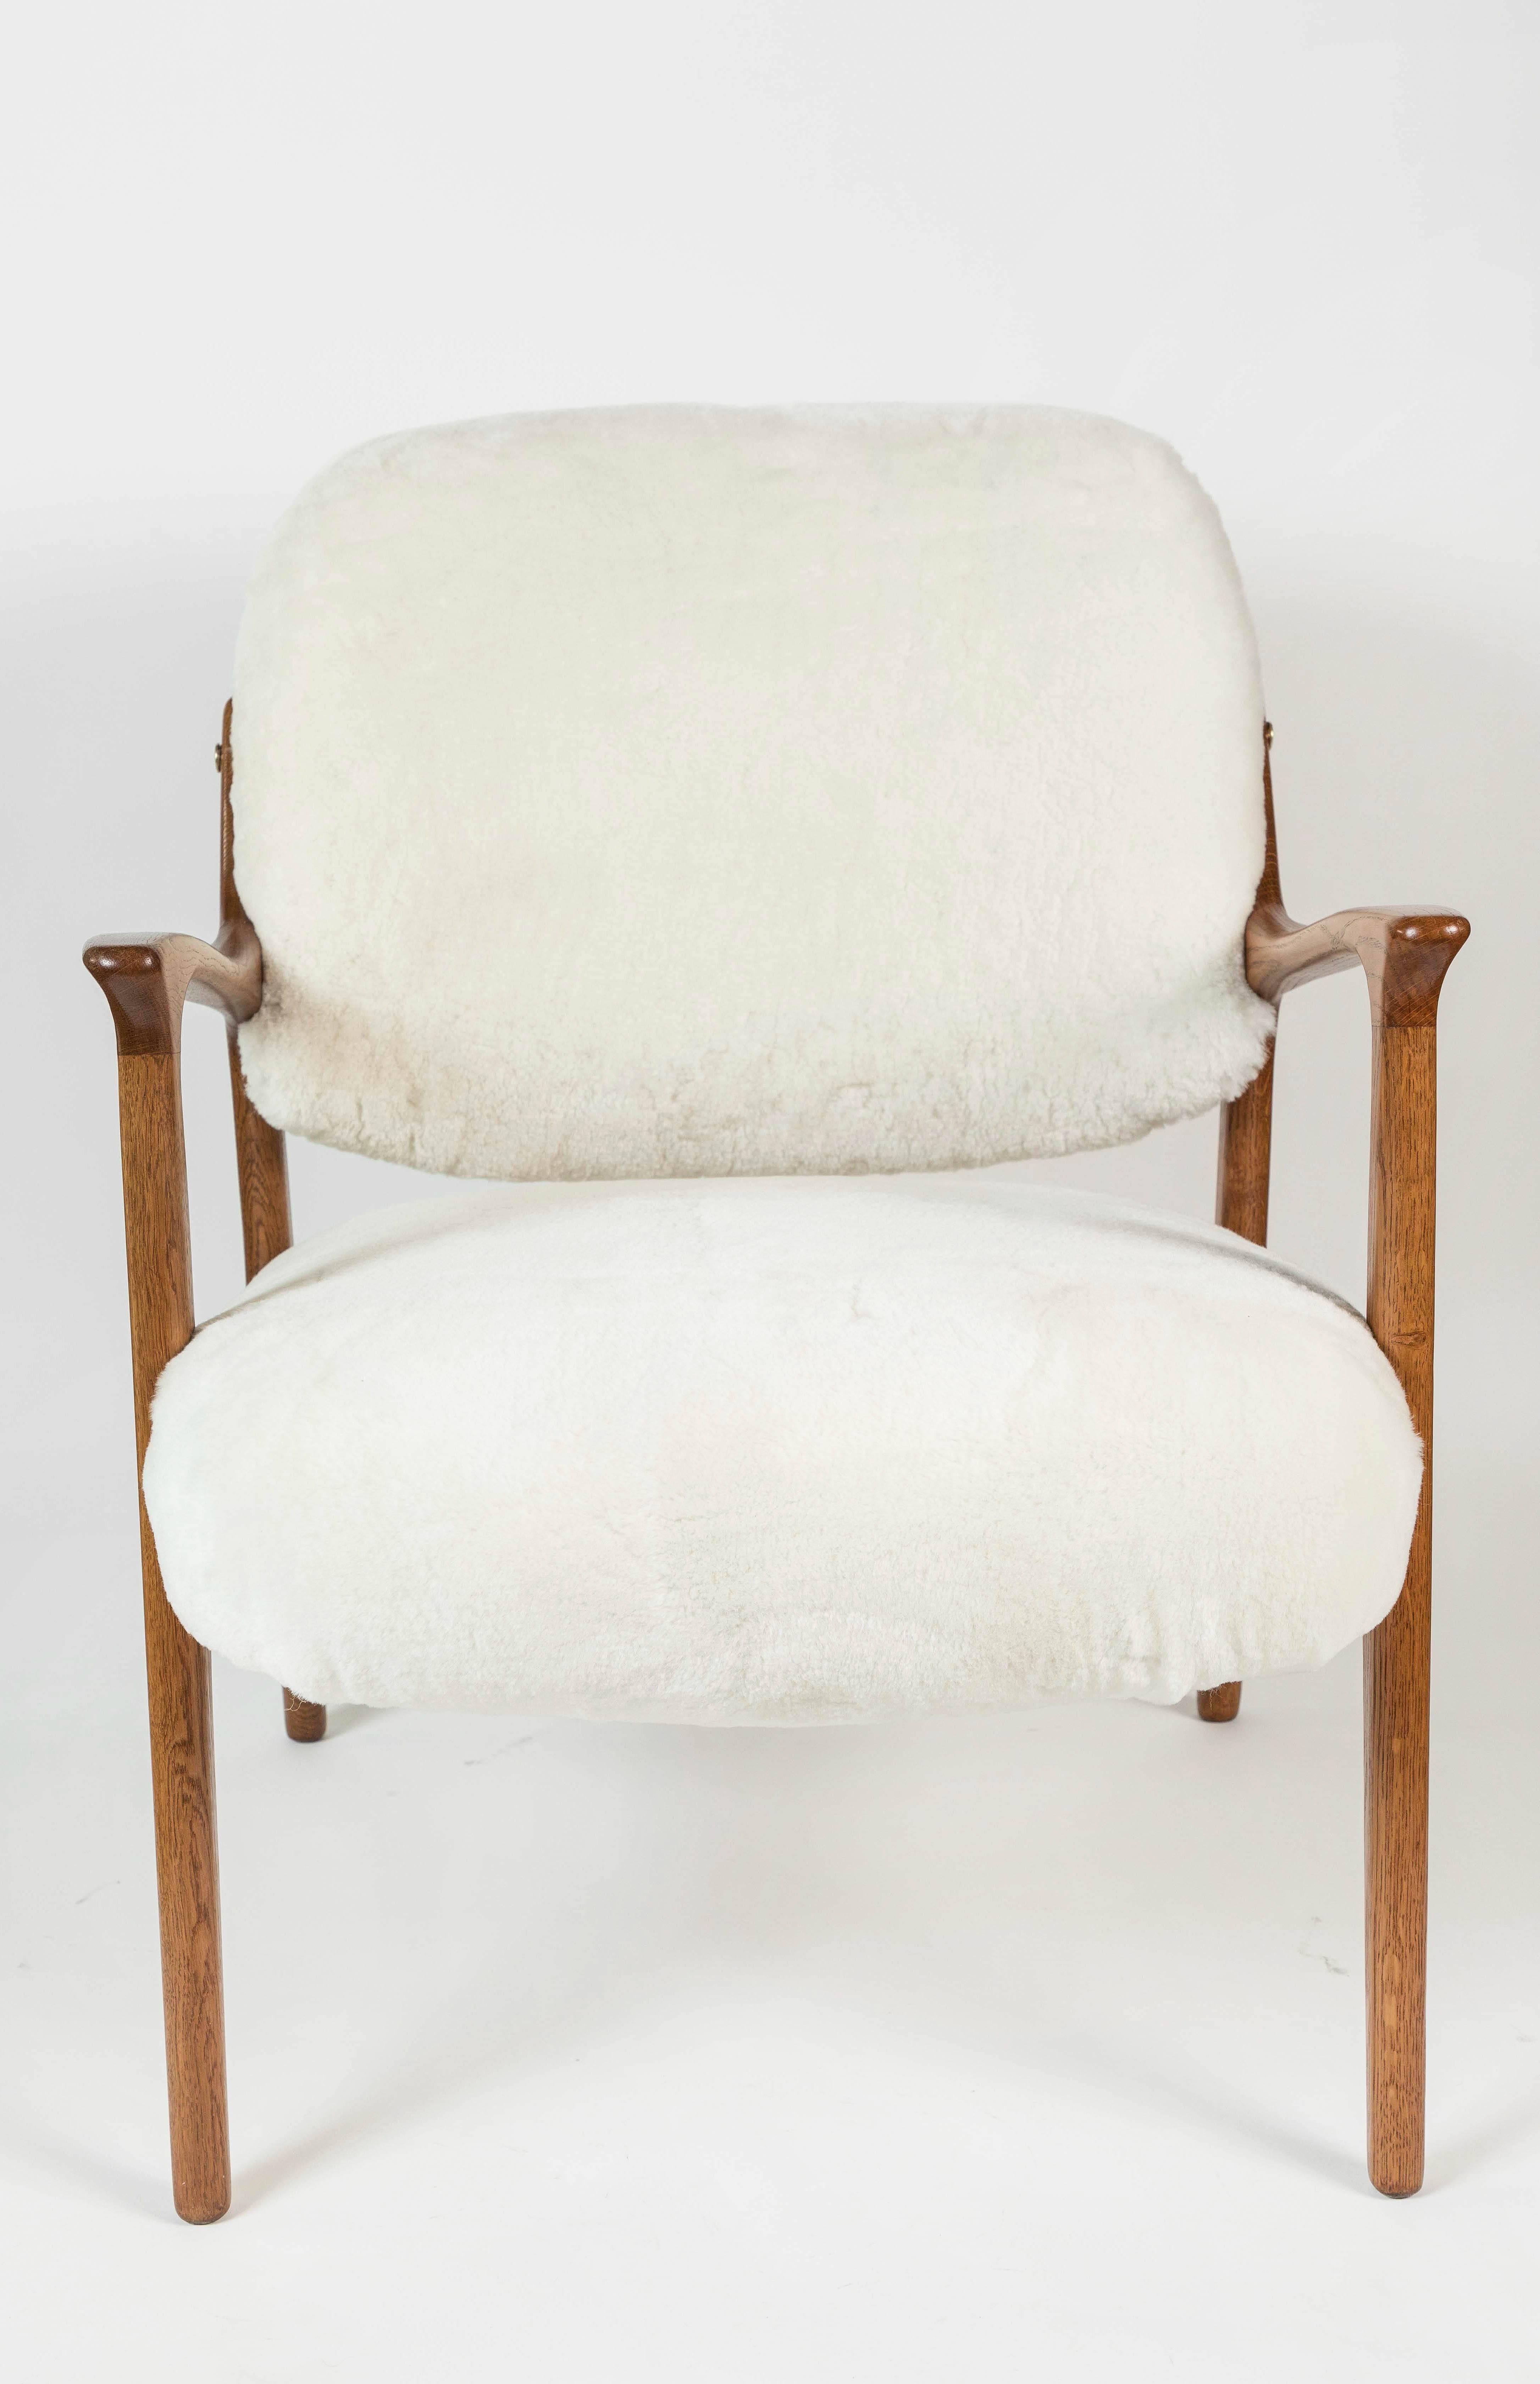 20th Century Mid-Century Teak and Shearling Armchairs